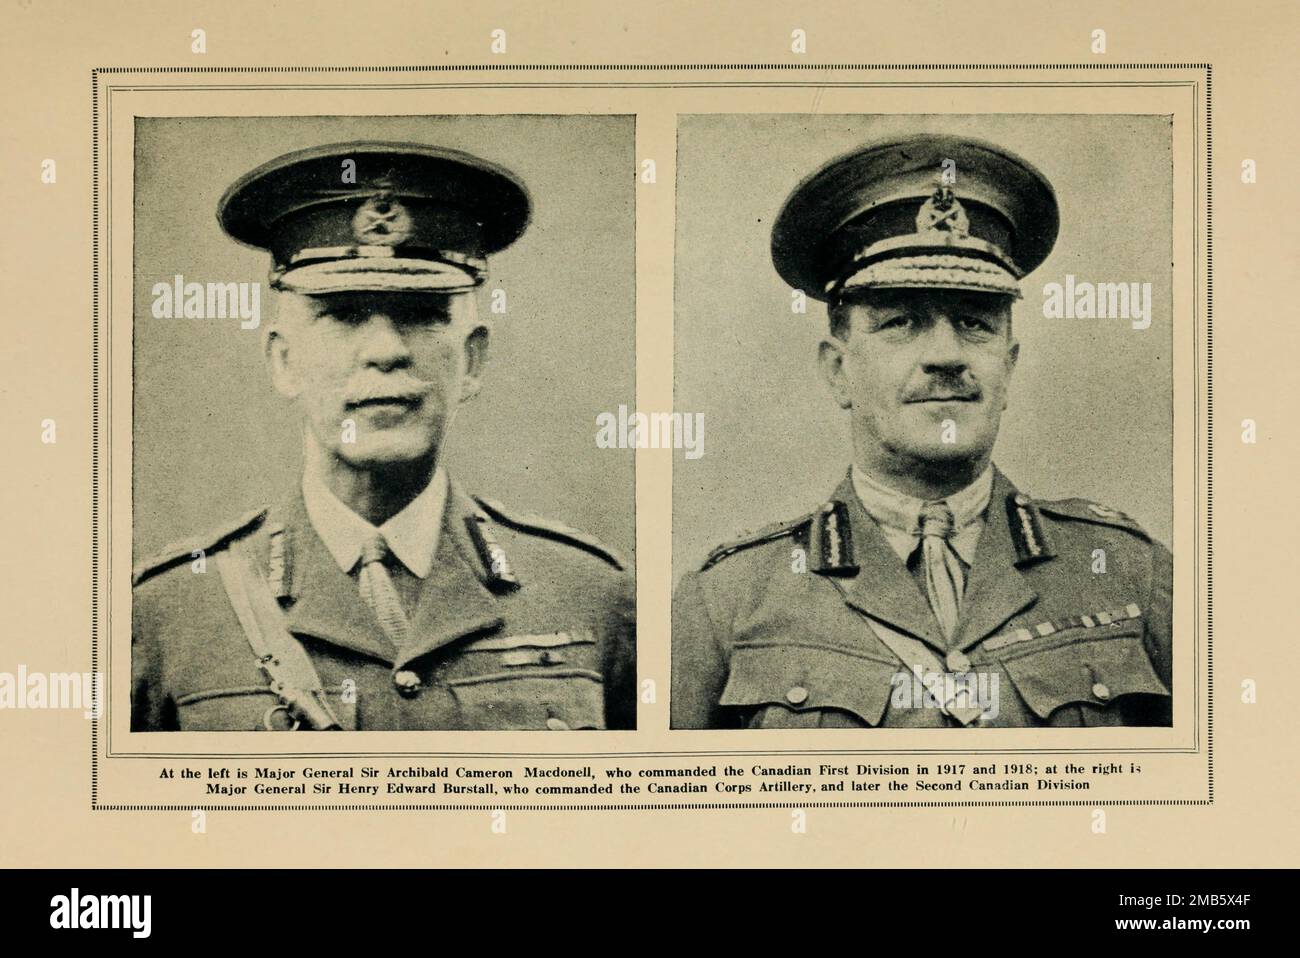 Major General Sir Archibald Cameron Macdonell [Left] Major General Sir Henry Burstall [Right] from the book The story of the great war; the complete historical records of events to date DIPLOMATIC AND STATE PAPERS by Reynolds, Francis Joseph, 1867-1937; Churchill, Allen Leon; Miller, Francis Trevelyan, 1877-1959; Wood, Leonard, 1860-1927; Knight, Austin Melvin, 1854-1927; Palmer, Frederick, 1873-1958; Simonds, Frank Herbert, 1878-; Ruhl, Arthur Brown, 1876-  Volume VII Published 1920 Stock Photo